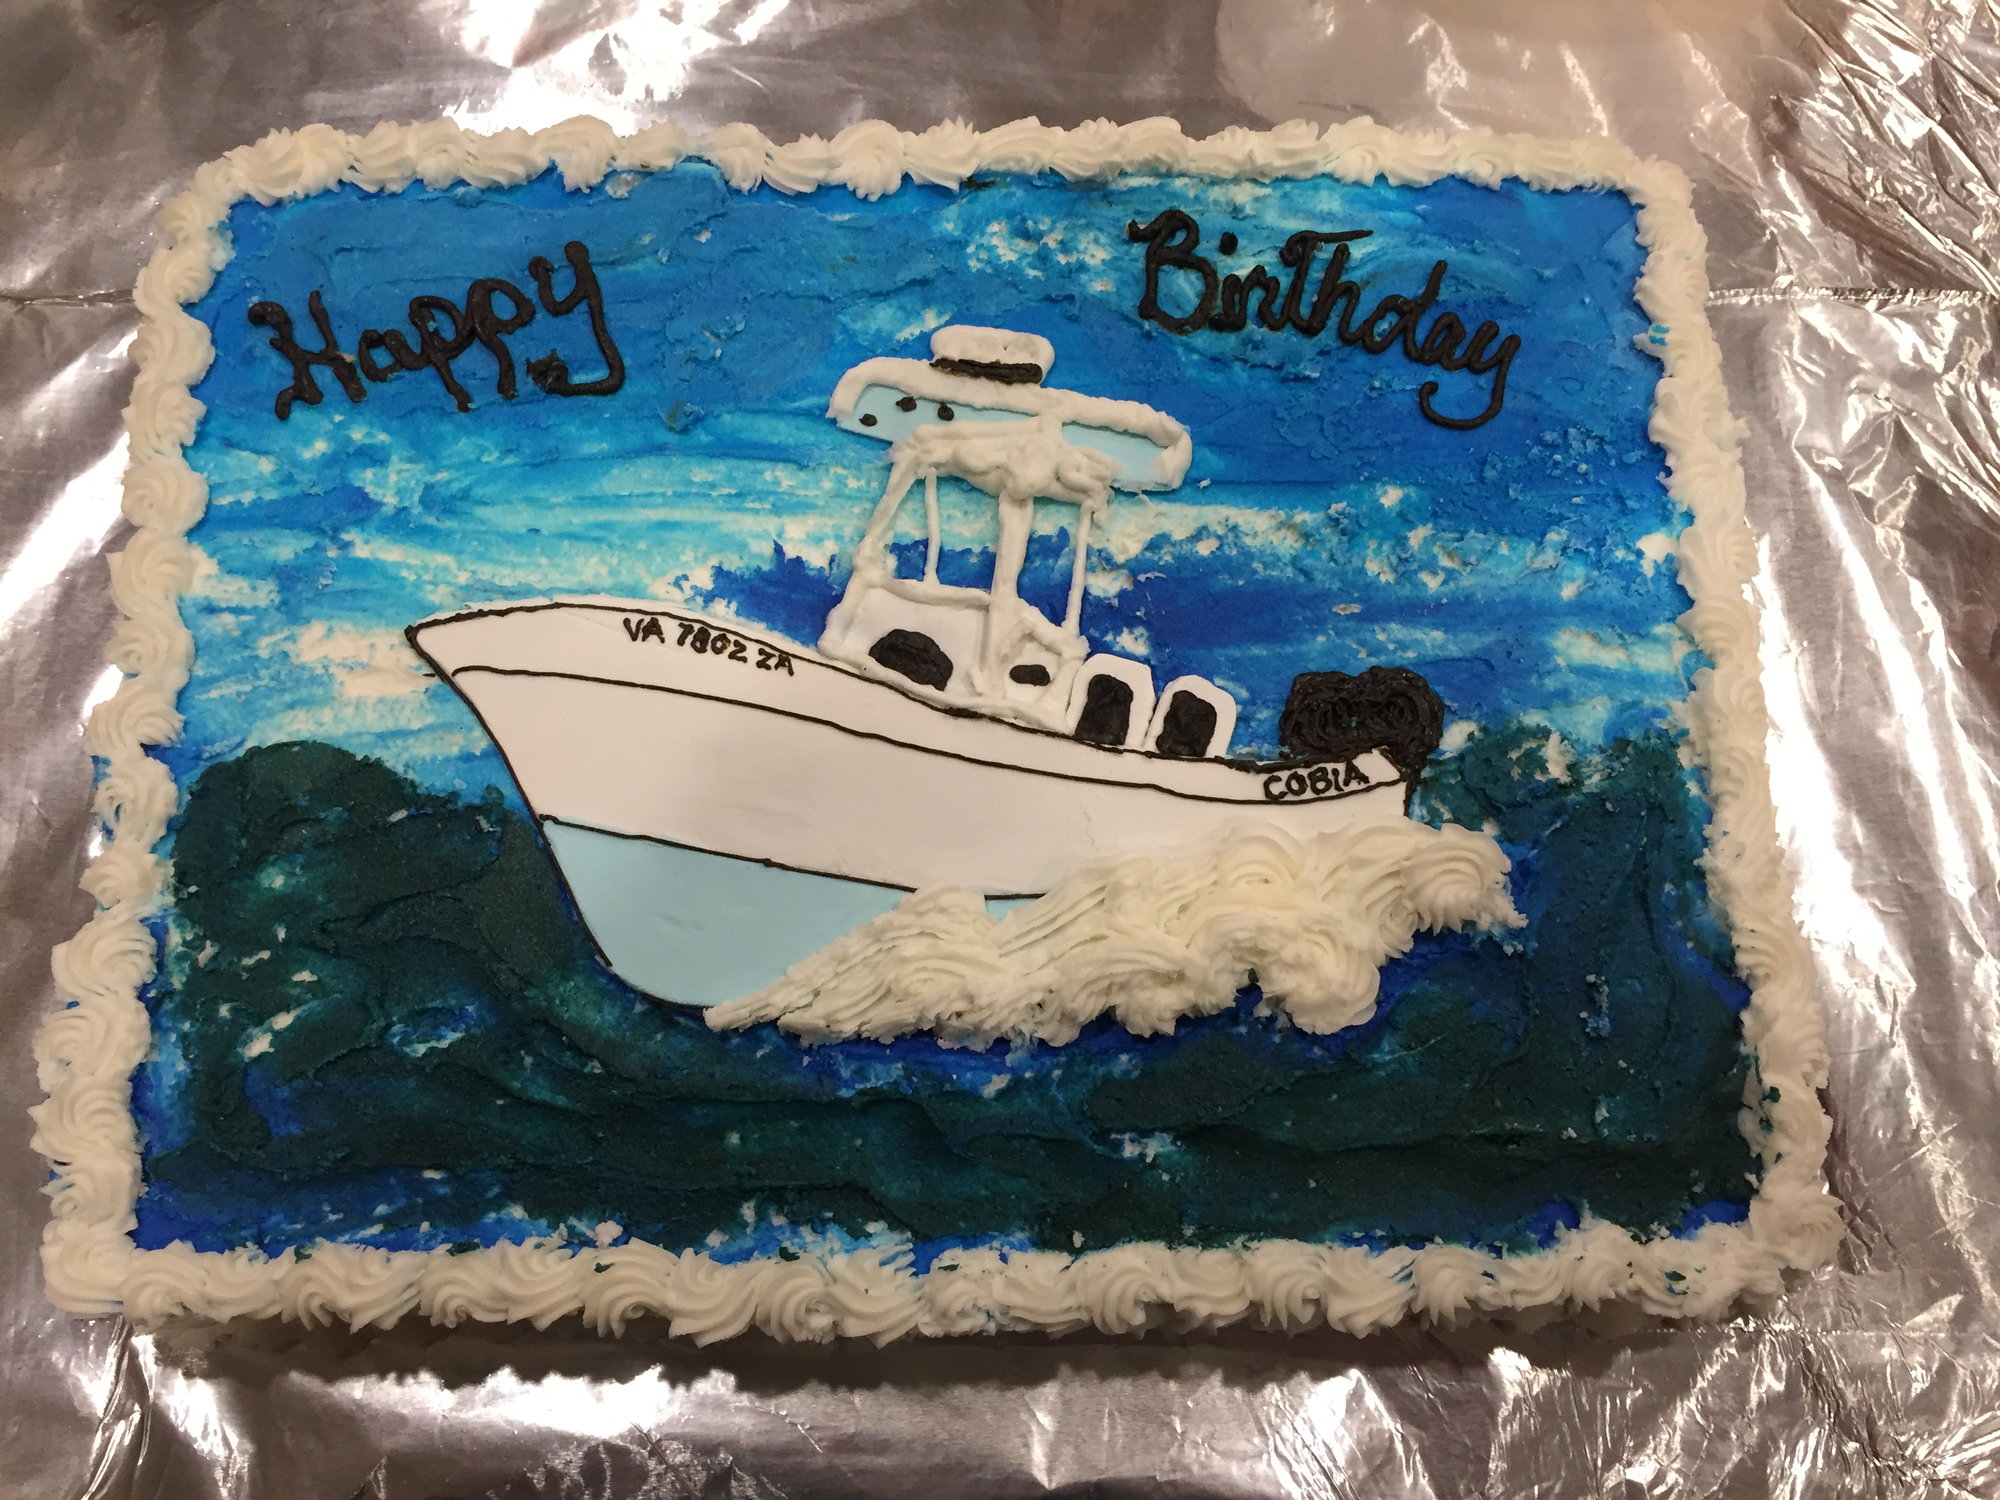 Birthday cake - The Hull Truth - Boating and Fishing Forum